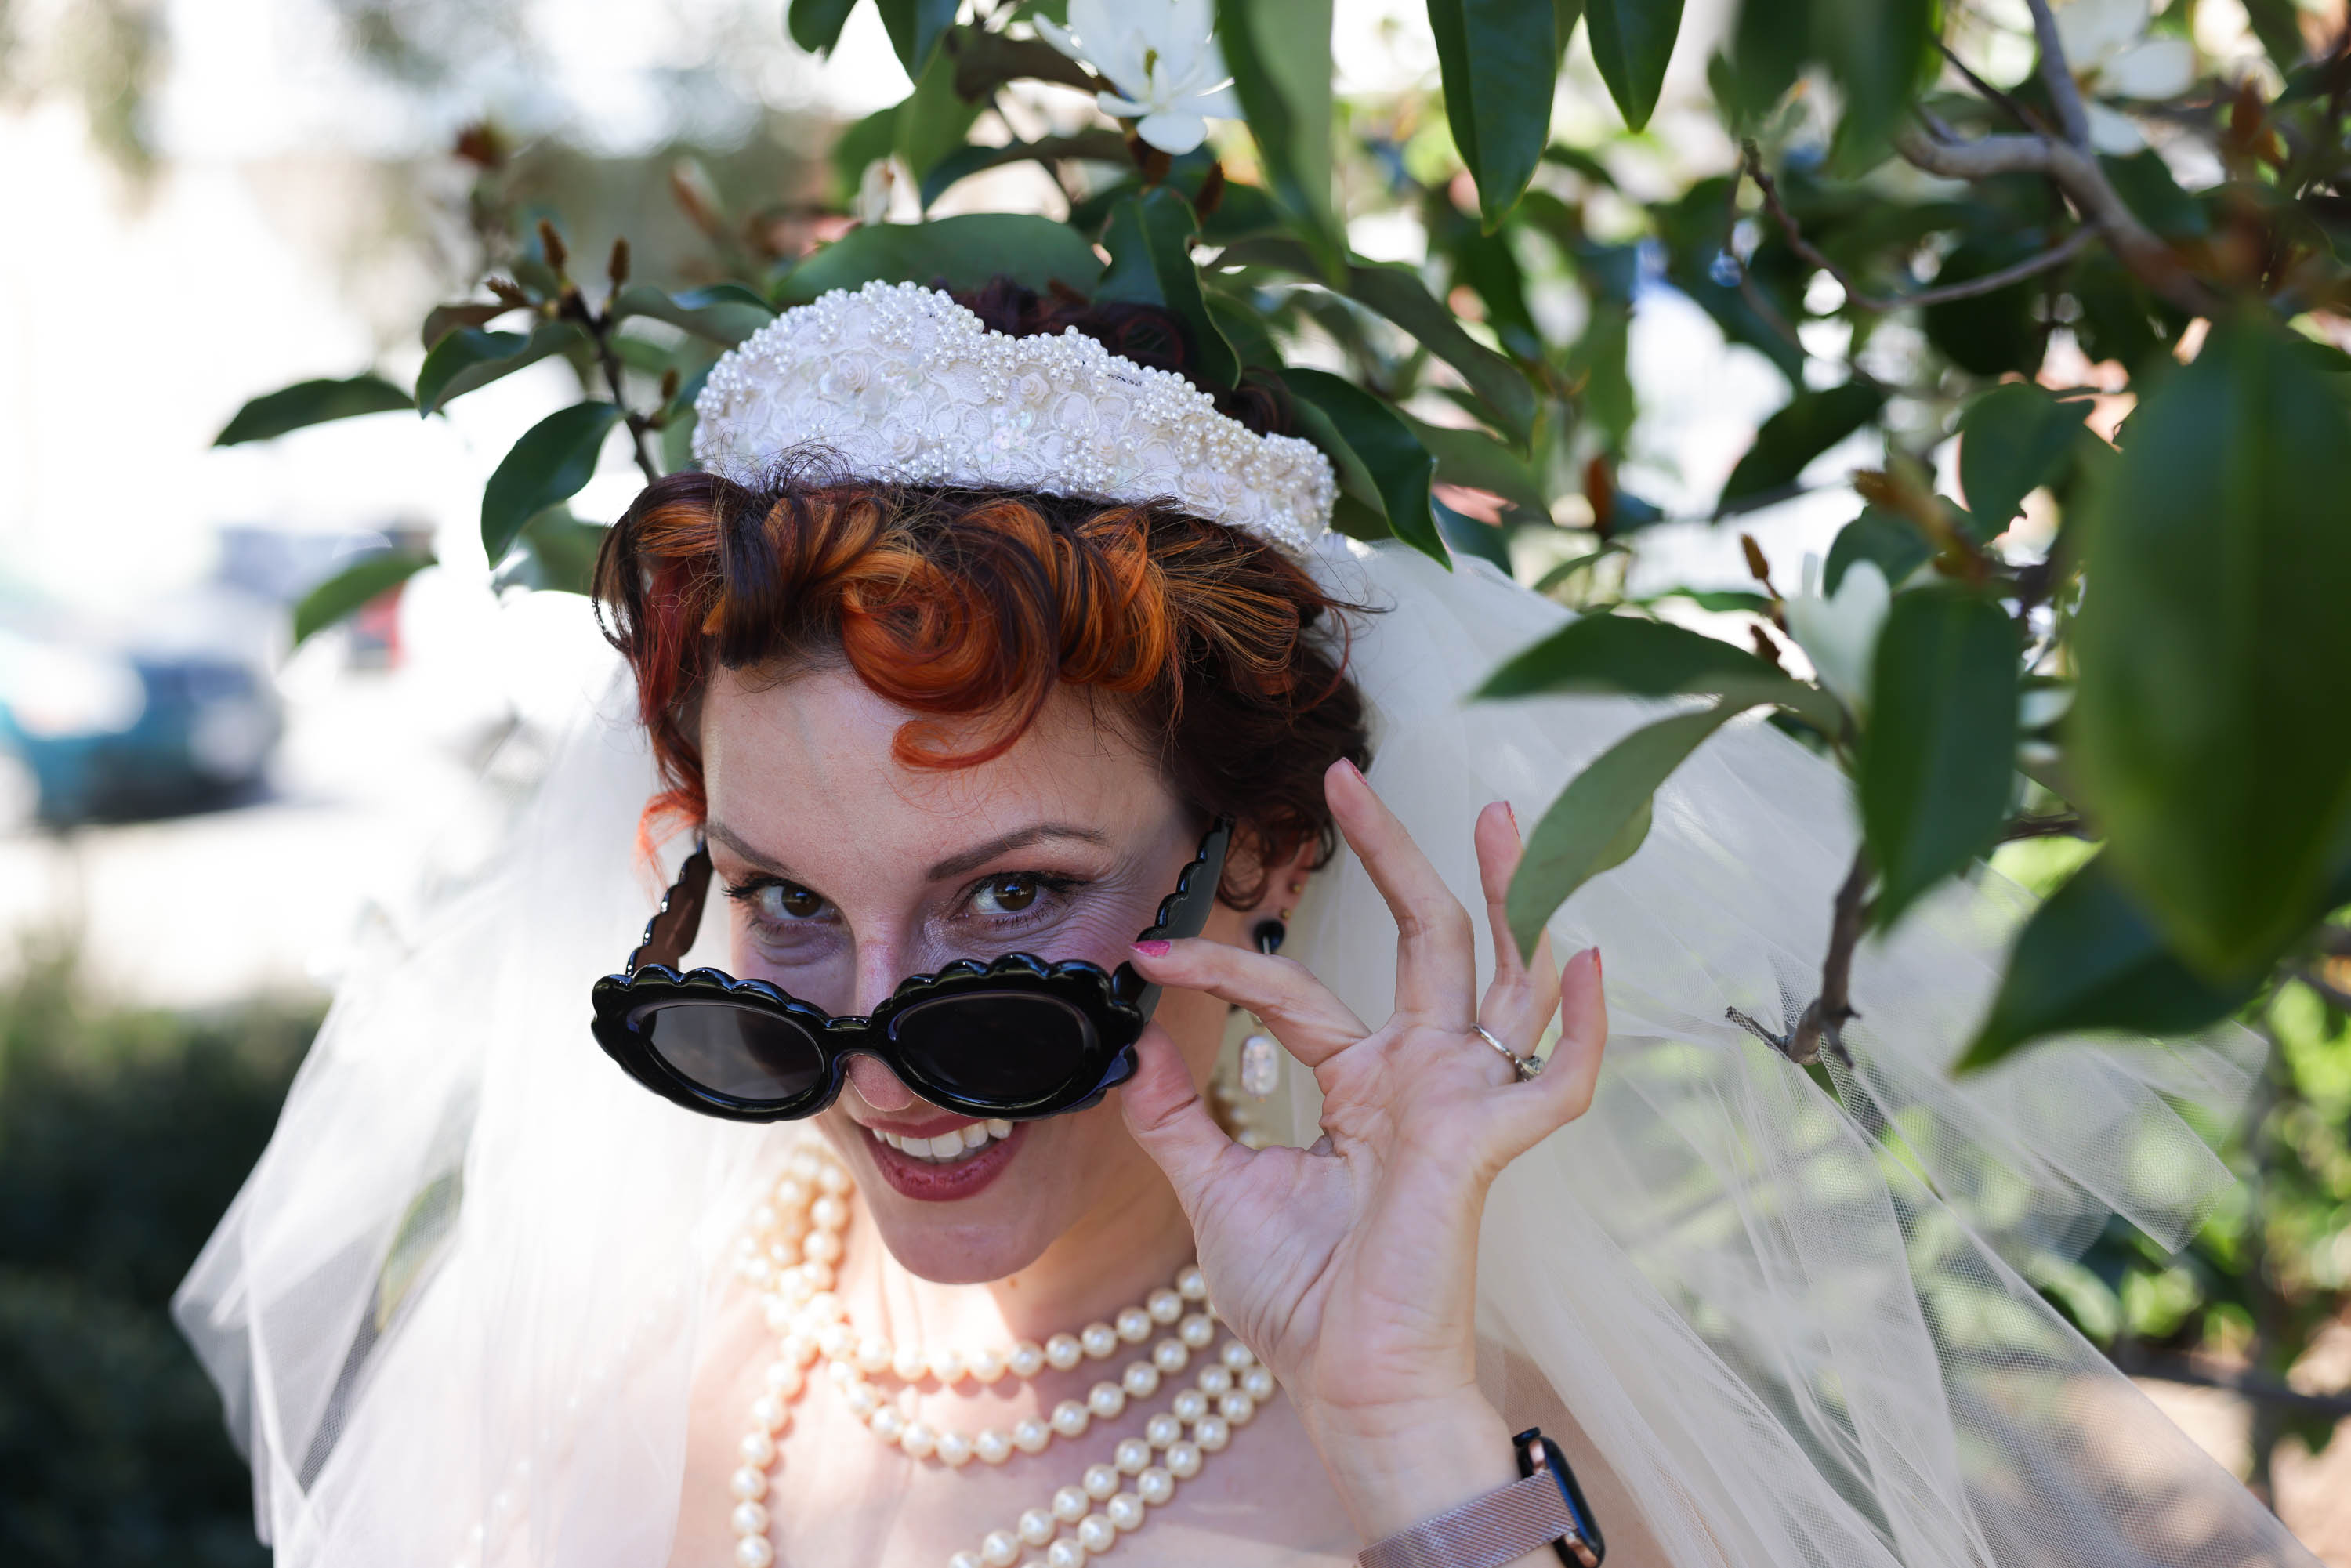 A bride with red hair peeks over her sunglasses, smiling playfully amidst green foliage.